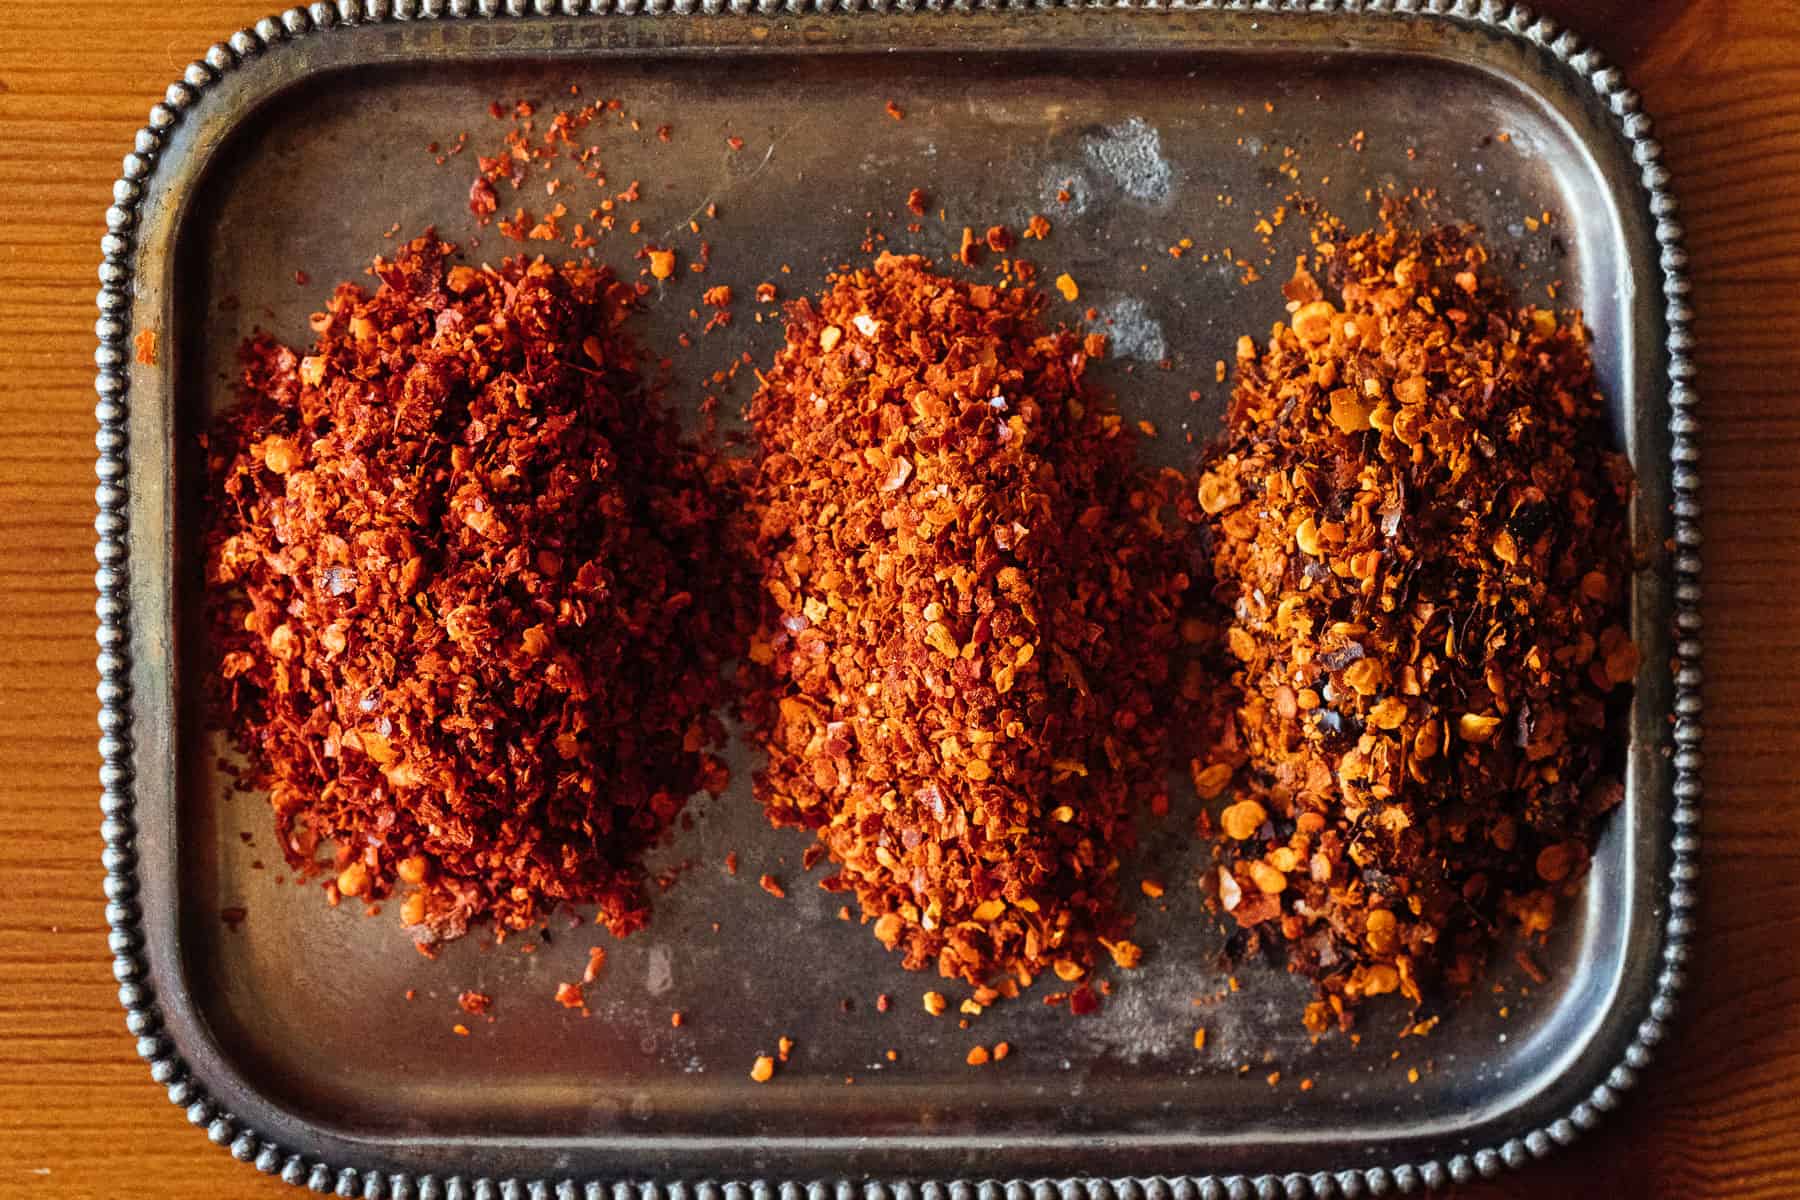 Sichuan, Aleppo, and Korean chili flakes side by side